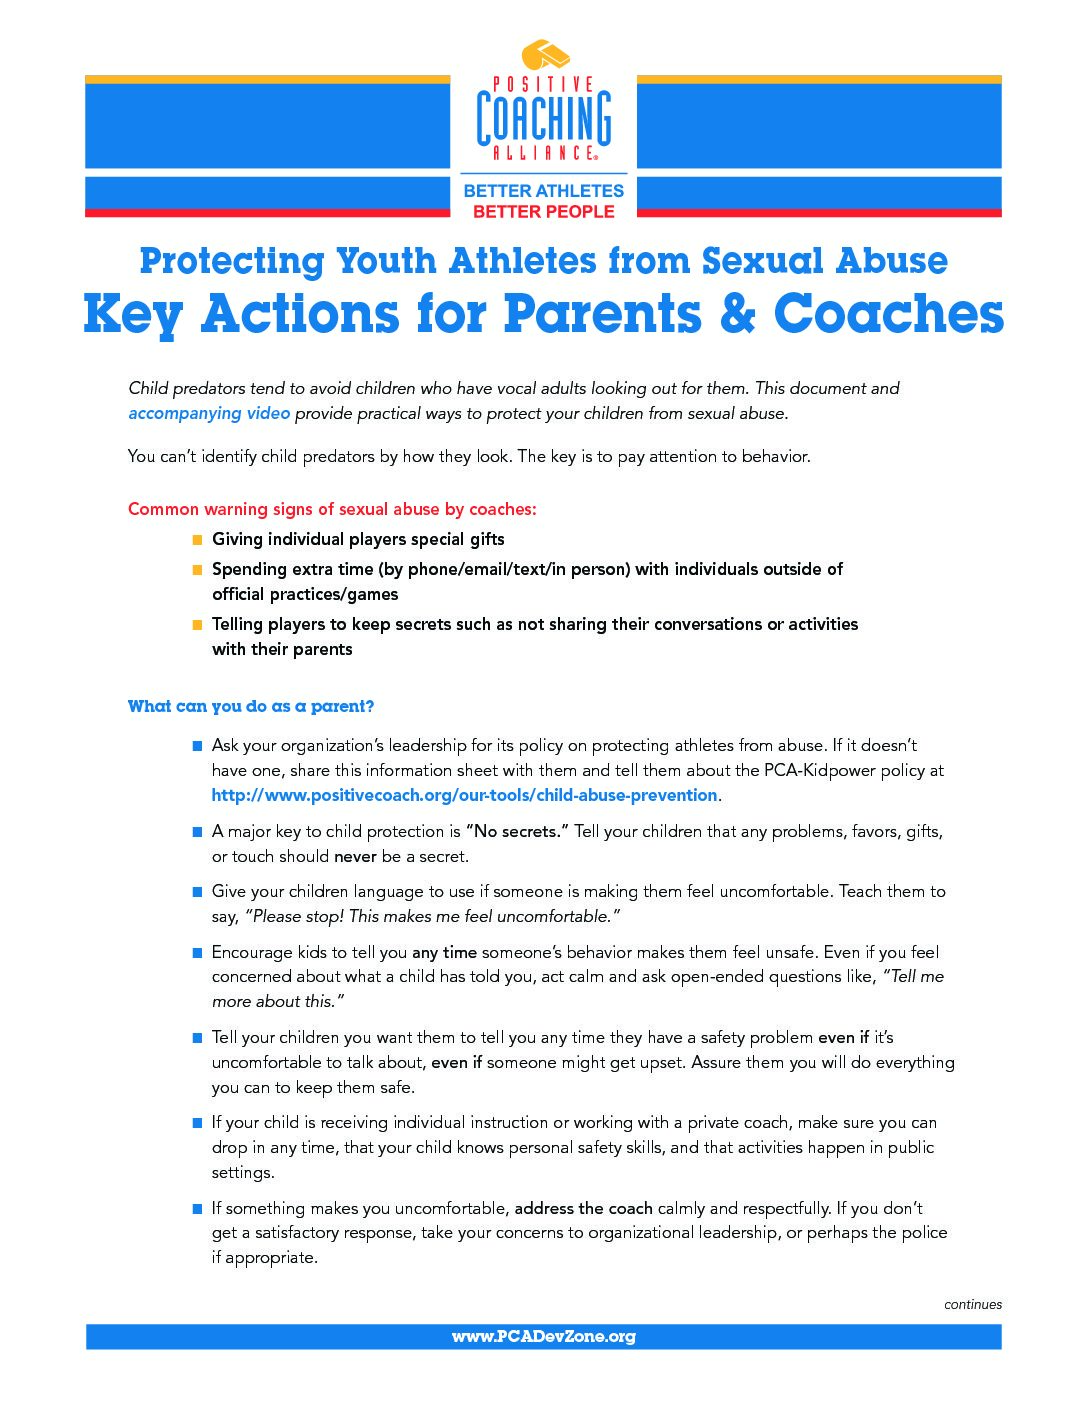 Protecting Youth Athletes - Key Actions for Parents and Coaches (PCA Resource) image image